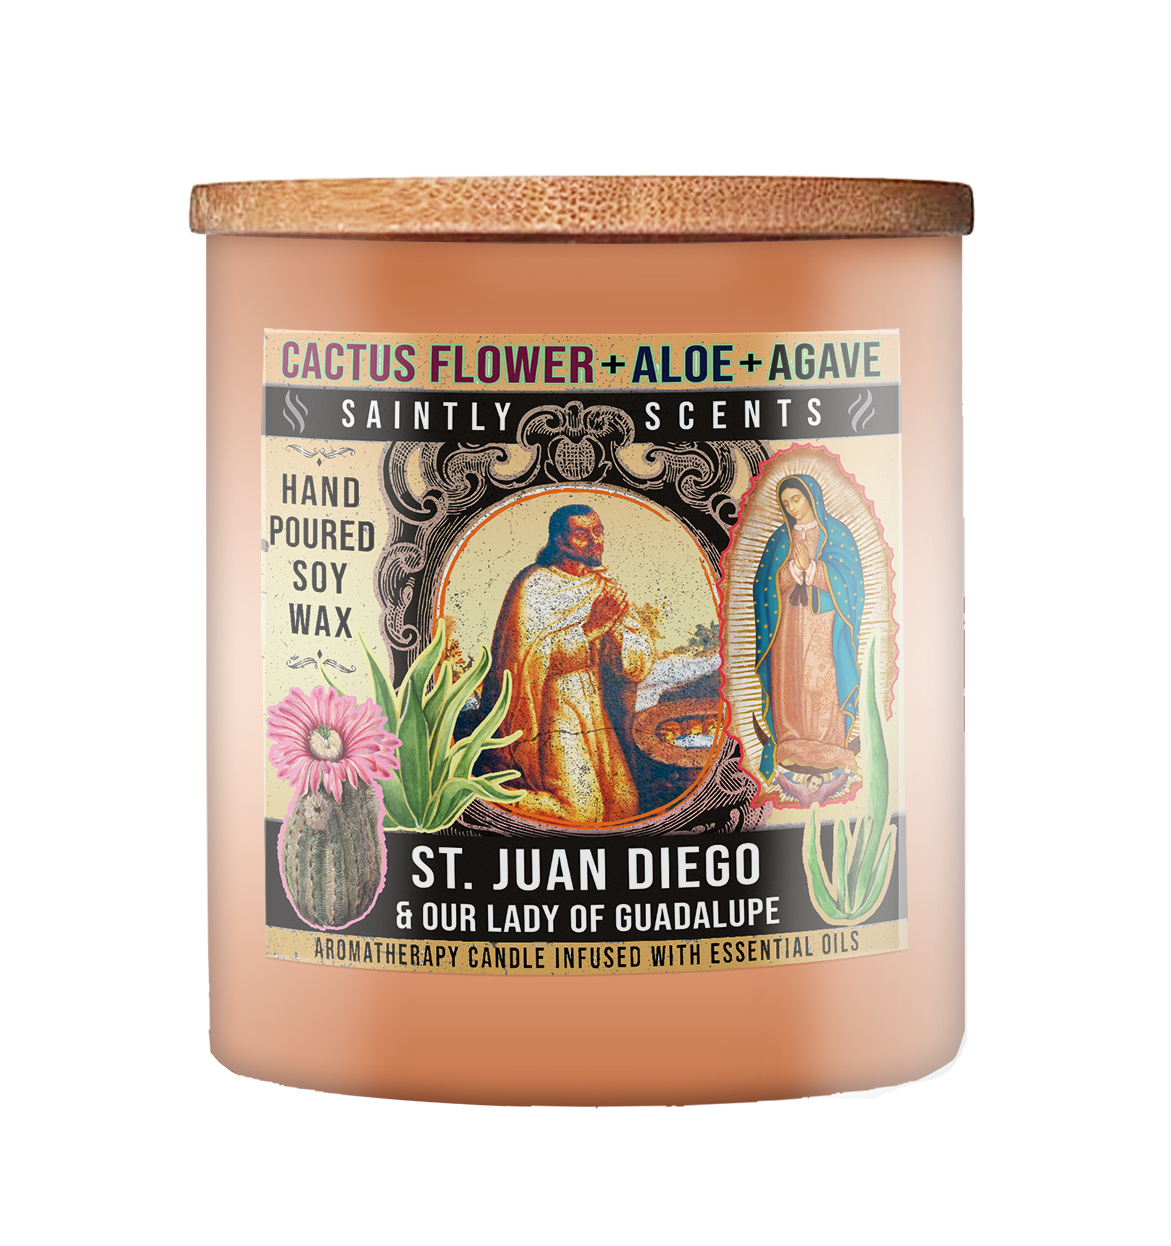 St. Juan Diego Cactus Flower, Aloe and Agave Scented Candle